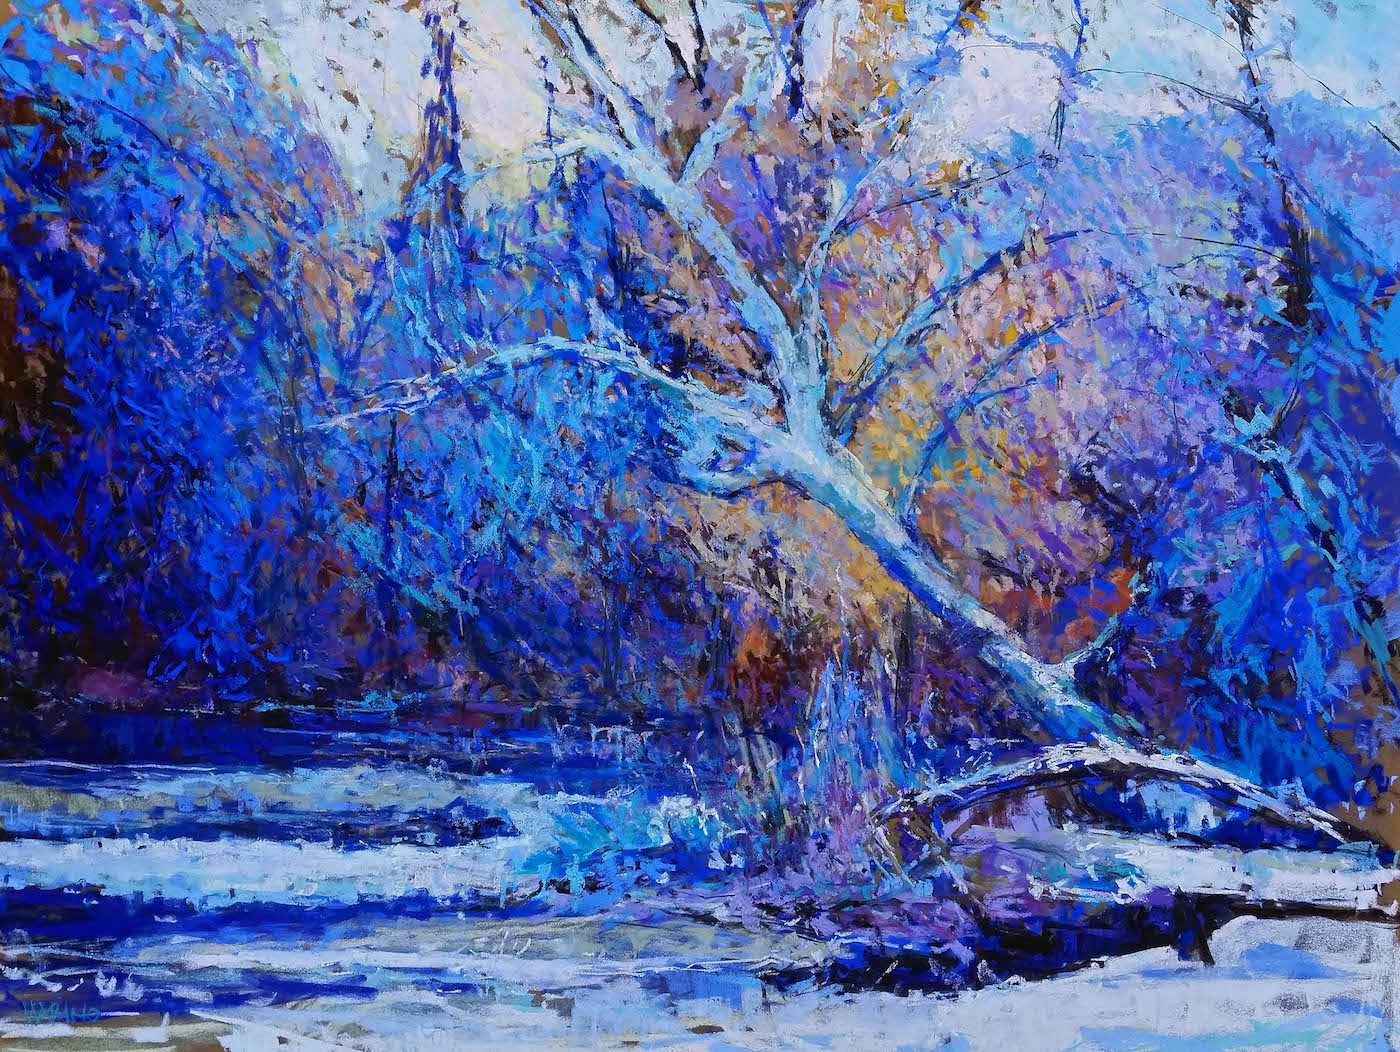 Maria Marino, "A Winters Passage," pastel on Sennelier LaCarte paper, 24 x 3 in. Available. Painted from a photo of a scene located in the Brandywine Valley, PA.